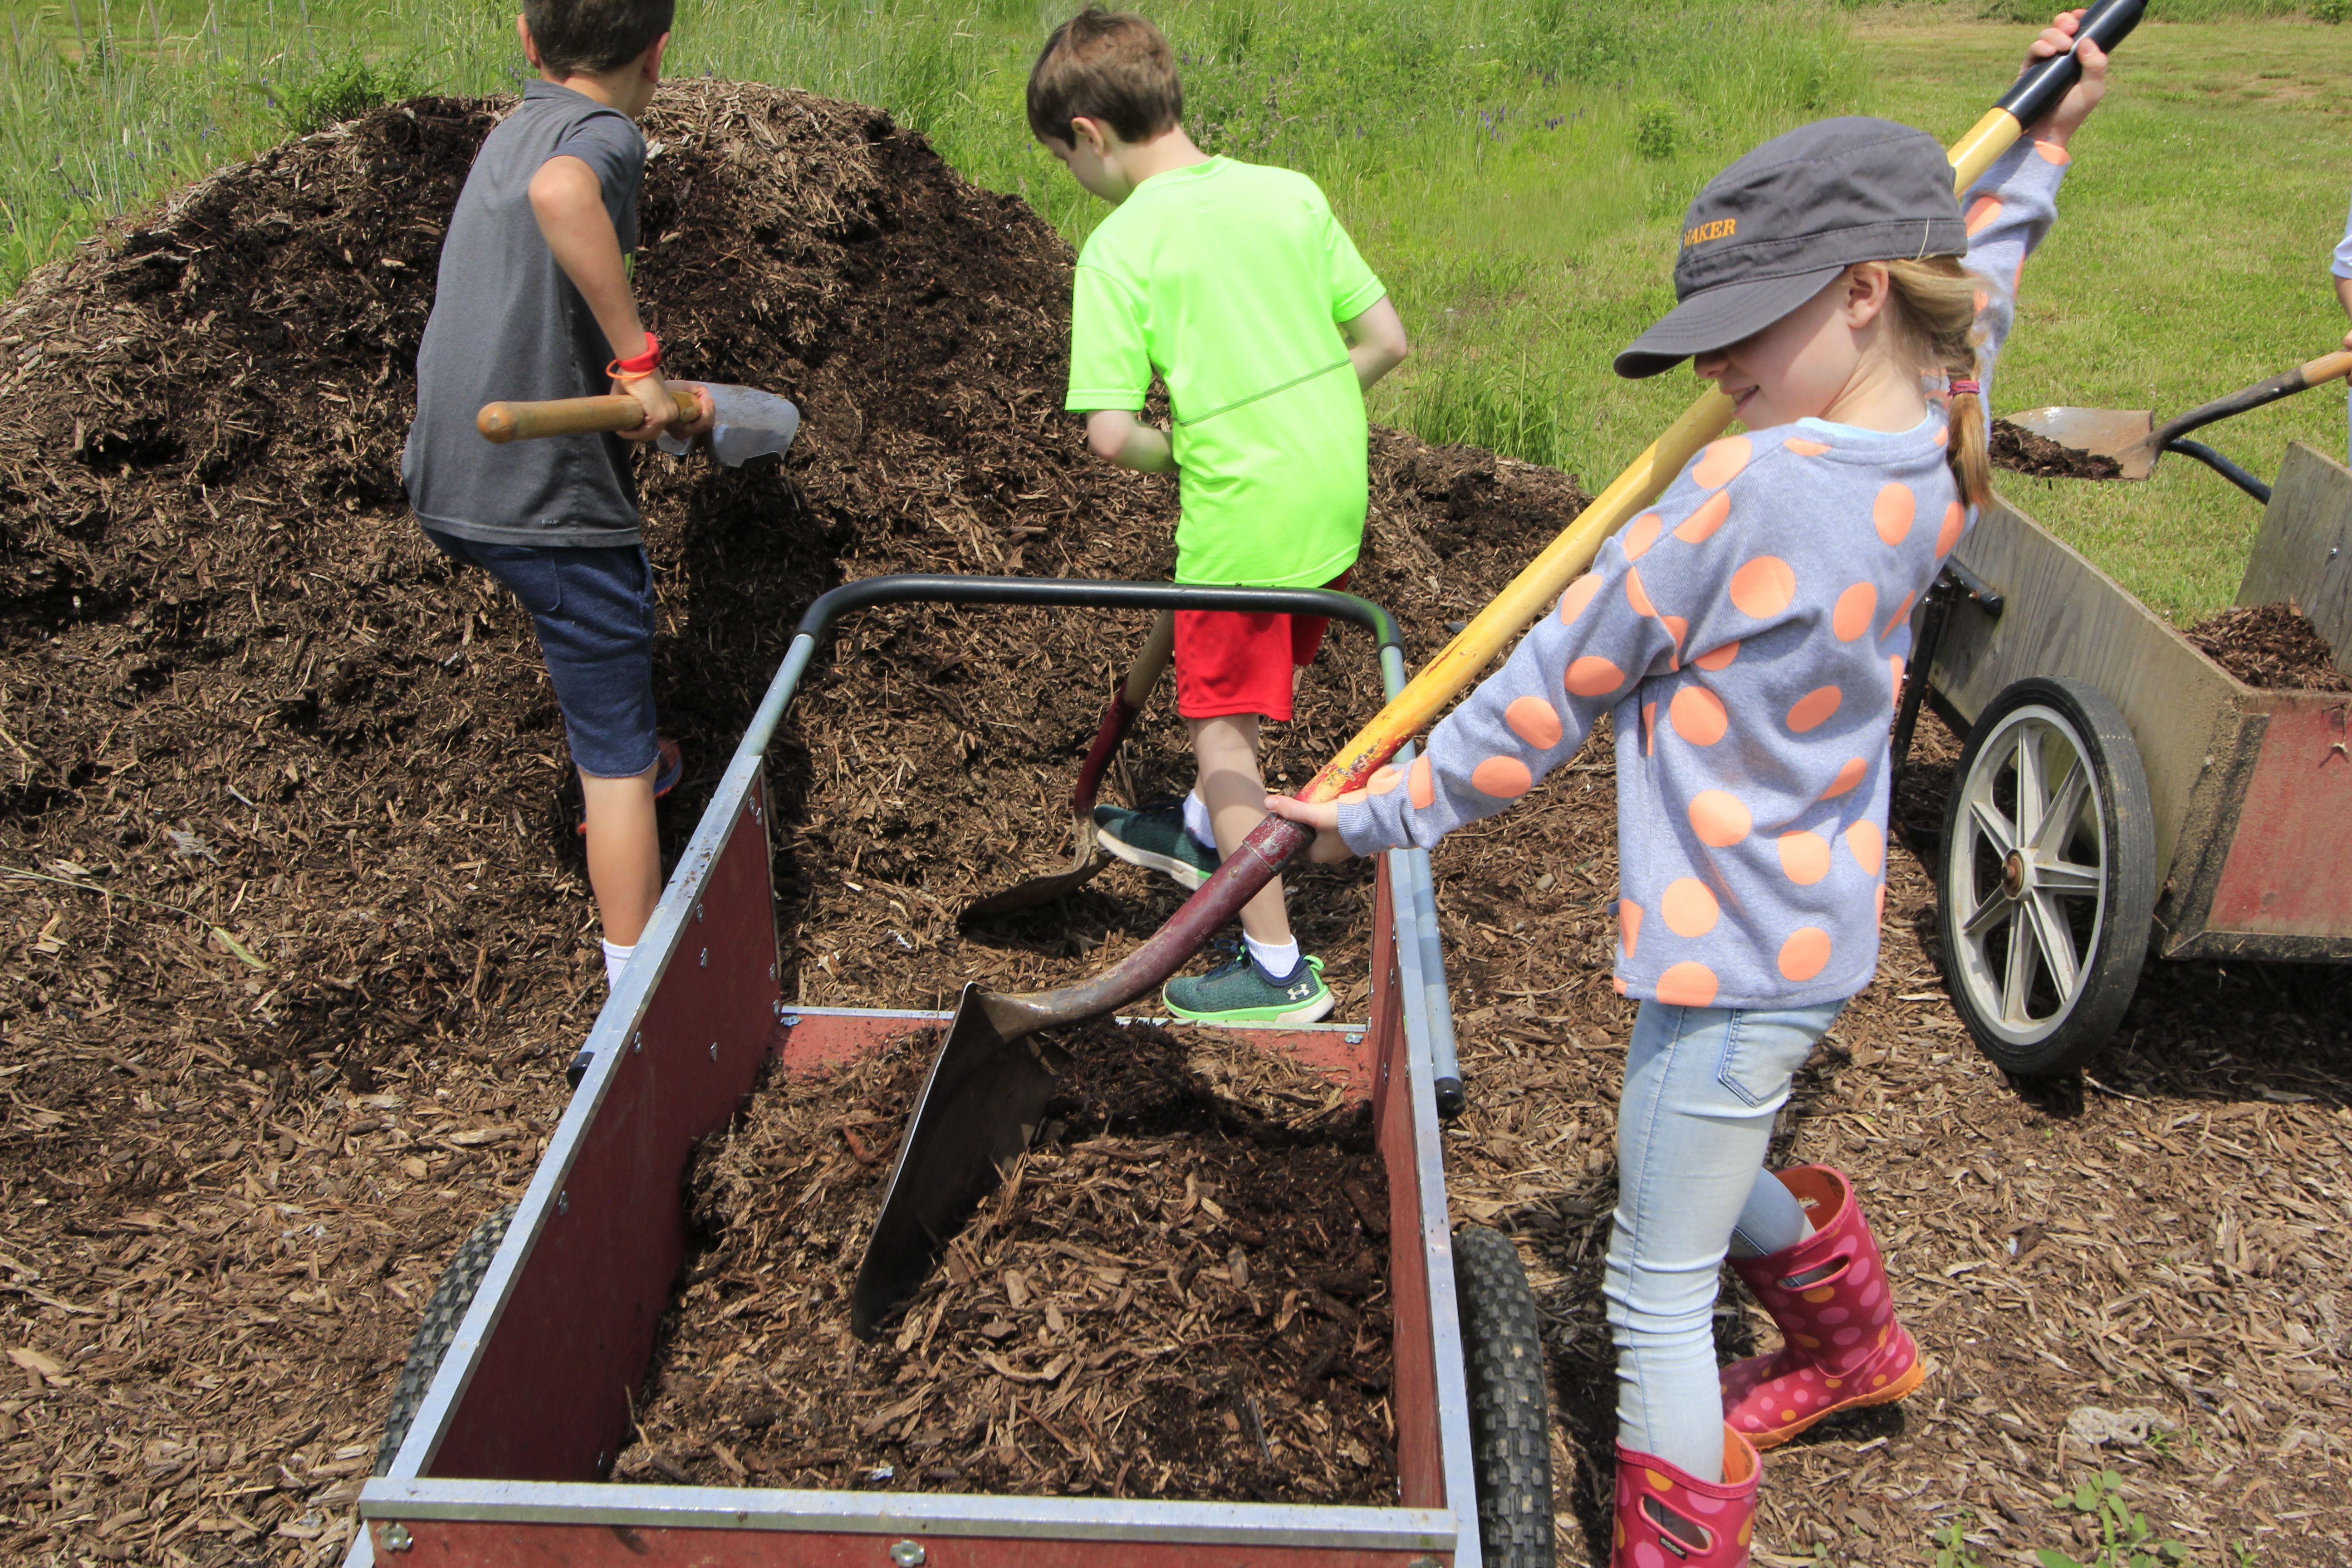 Students moving soil at the community garden